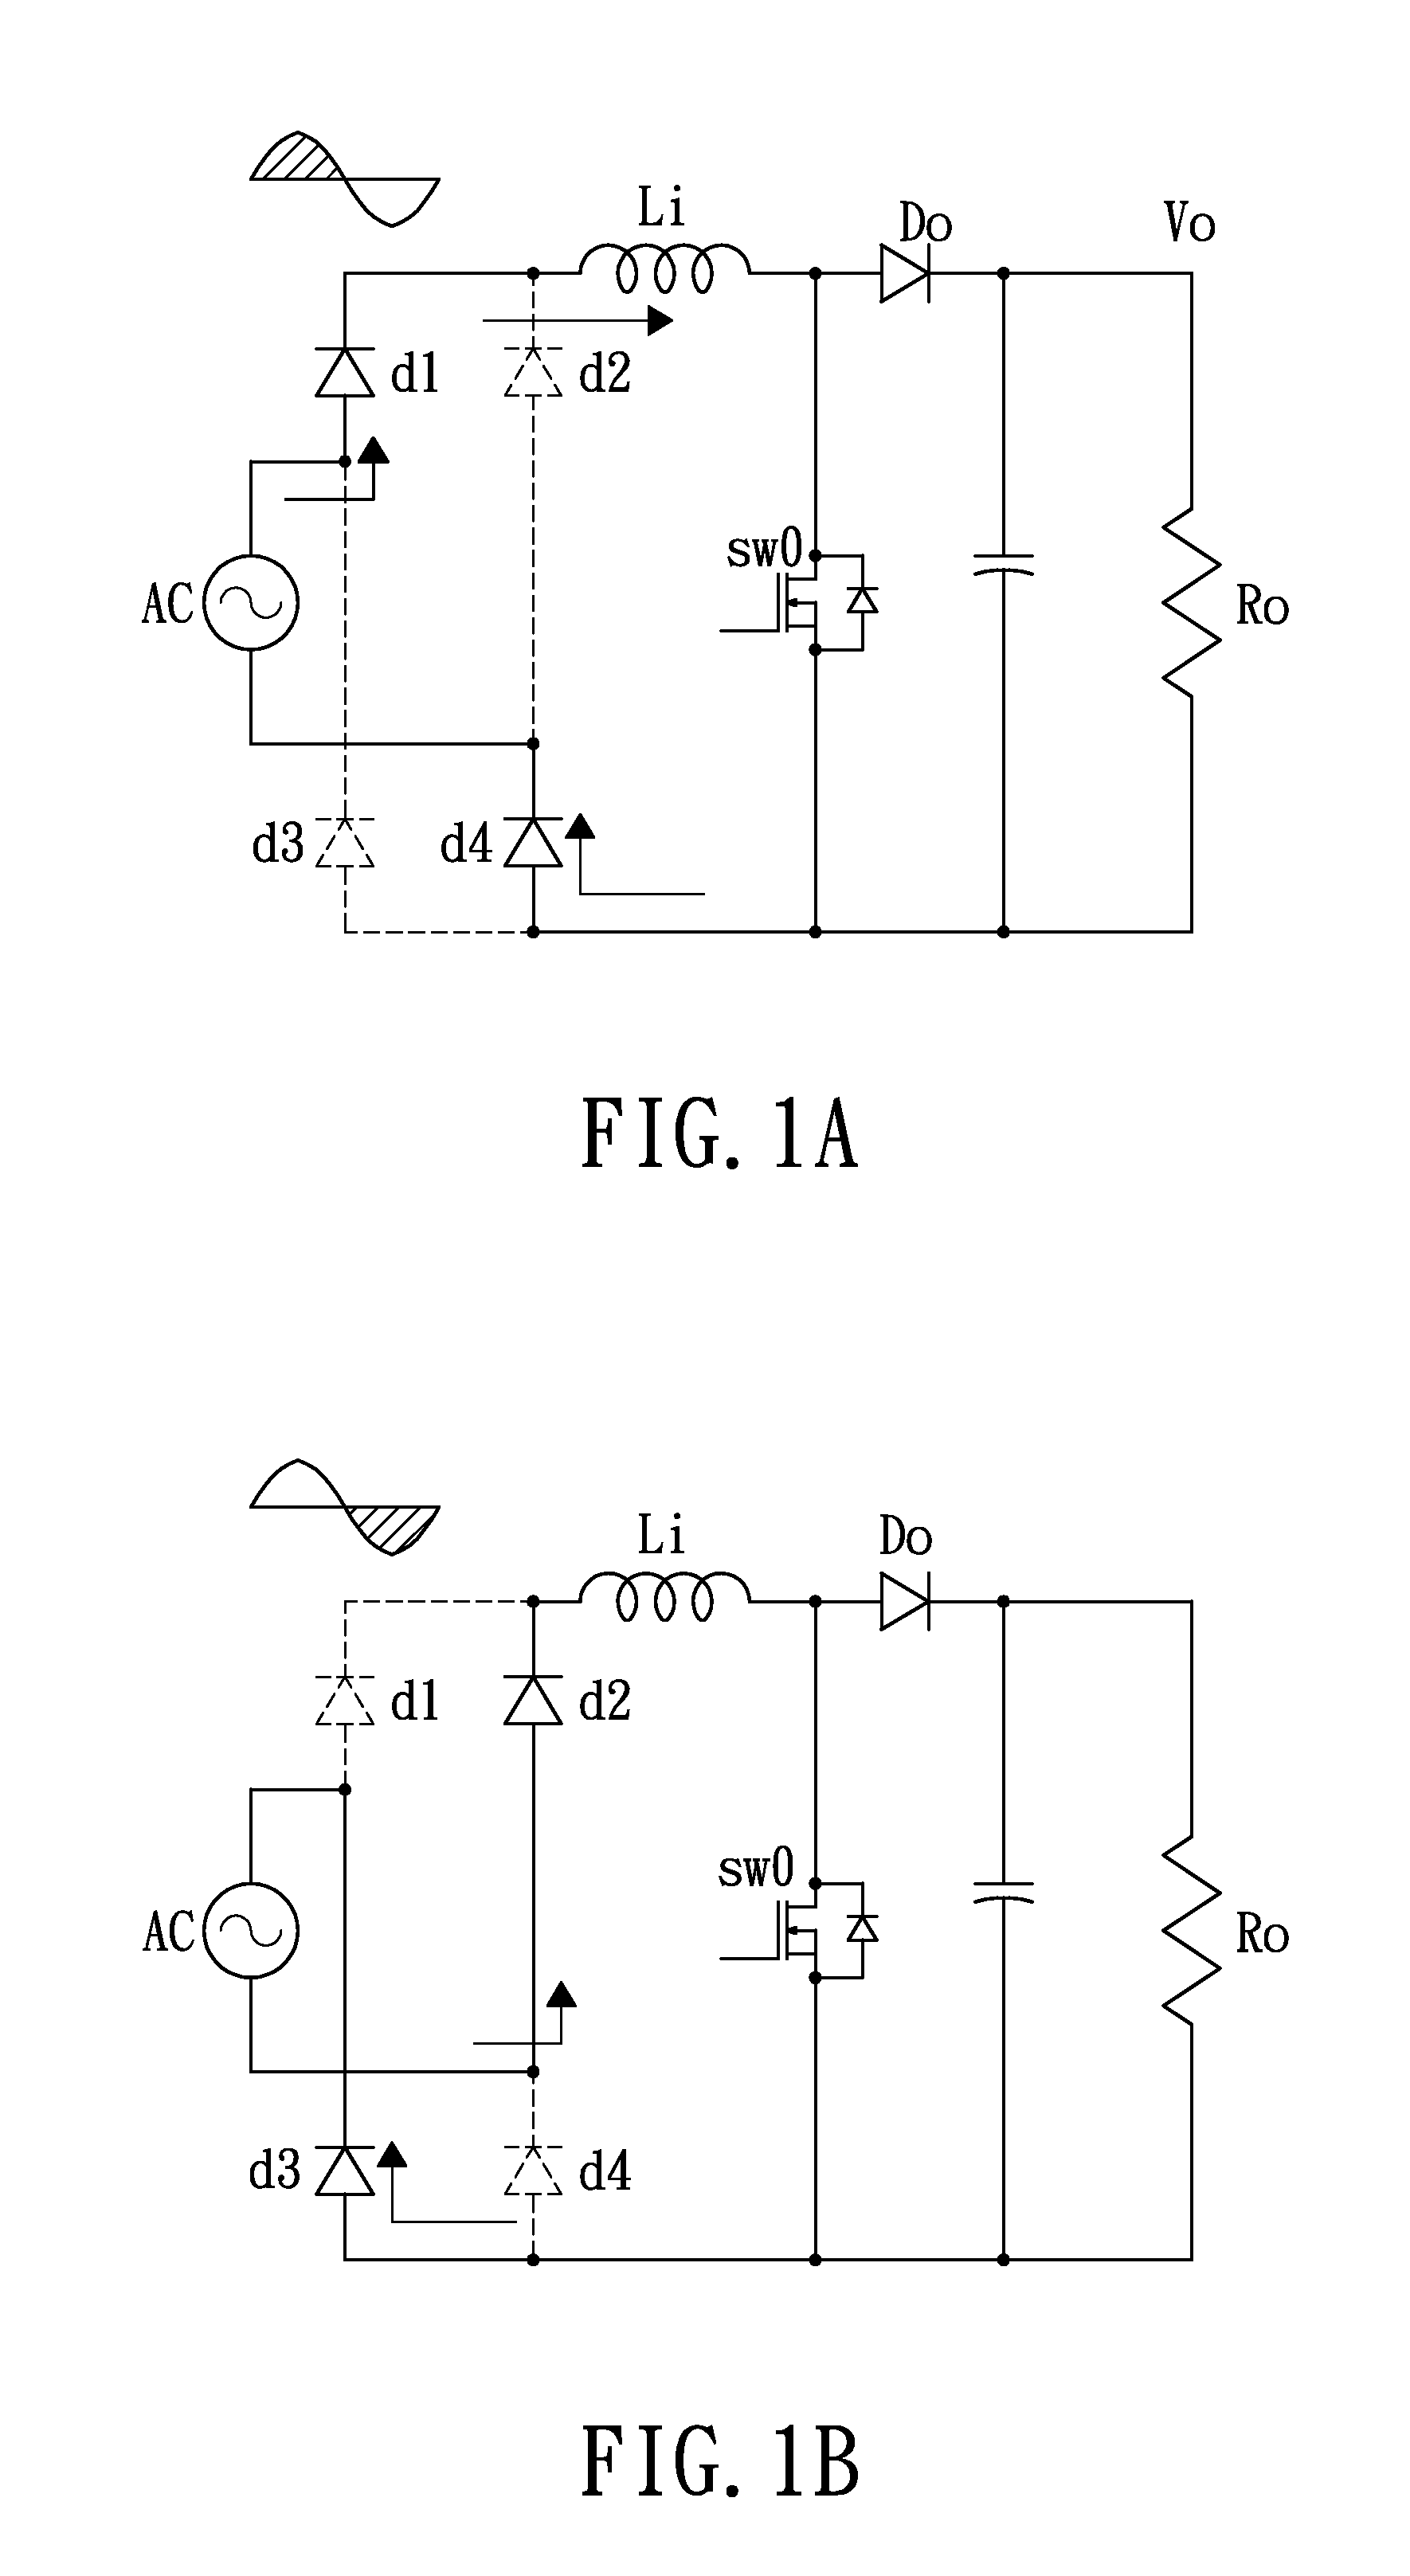 Power factor correction (PFC) controller and bridgeless pfc circuit with the same